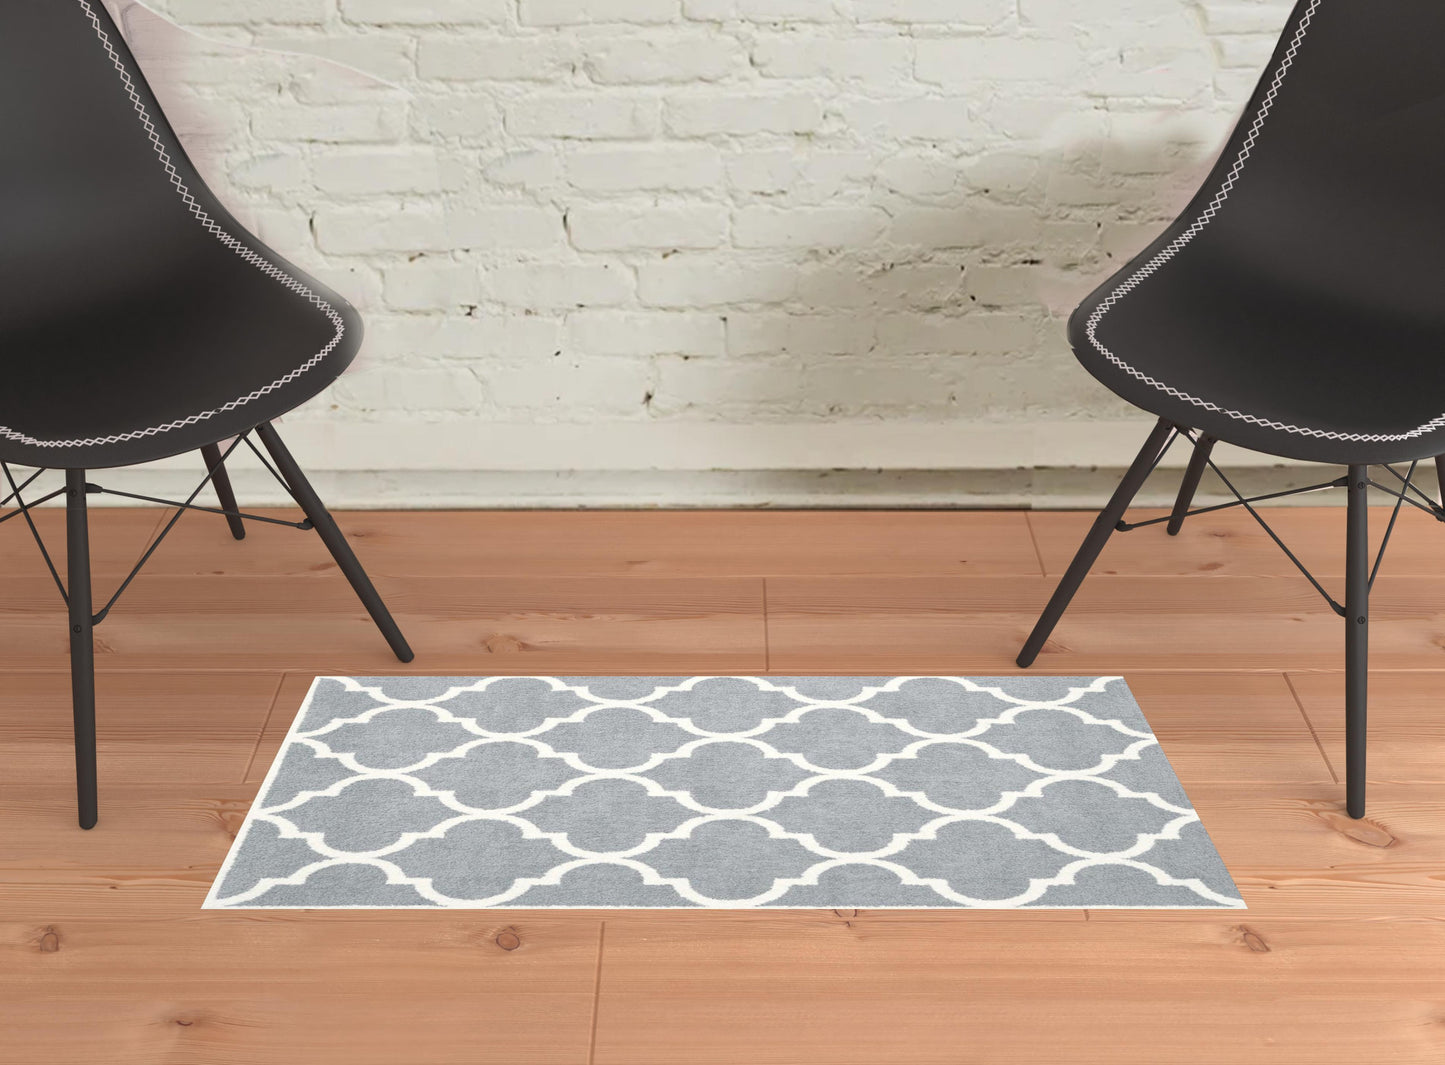 2' X 3' Grey And Ivory Geometric Shag Power Loom Stain Resistant Area Rug